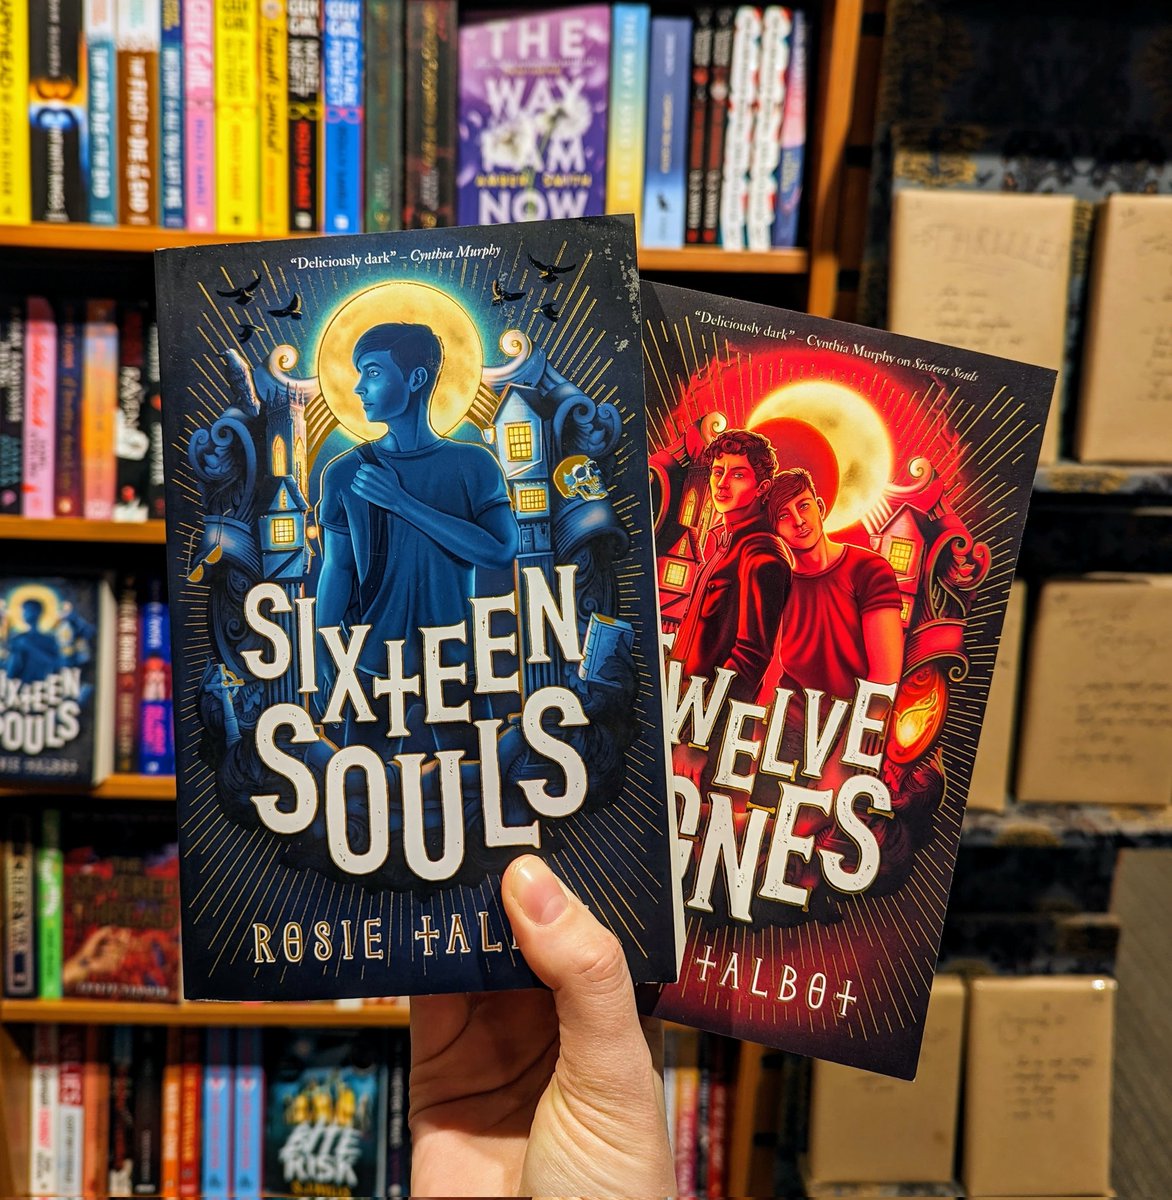 So thrilled that Horror is on the rise! If you're a school or library and you'd like copies of my paranormal horror YA duology please comment and retweet. I'll pick some responses at random to send copies to!